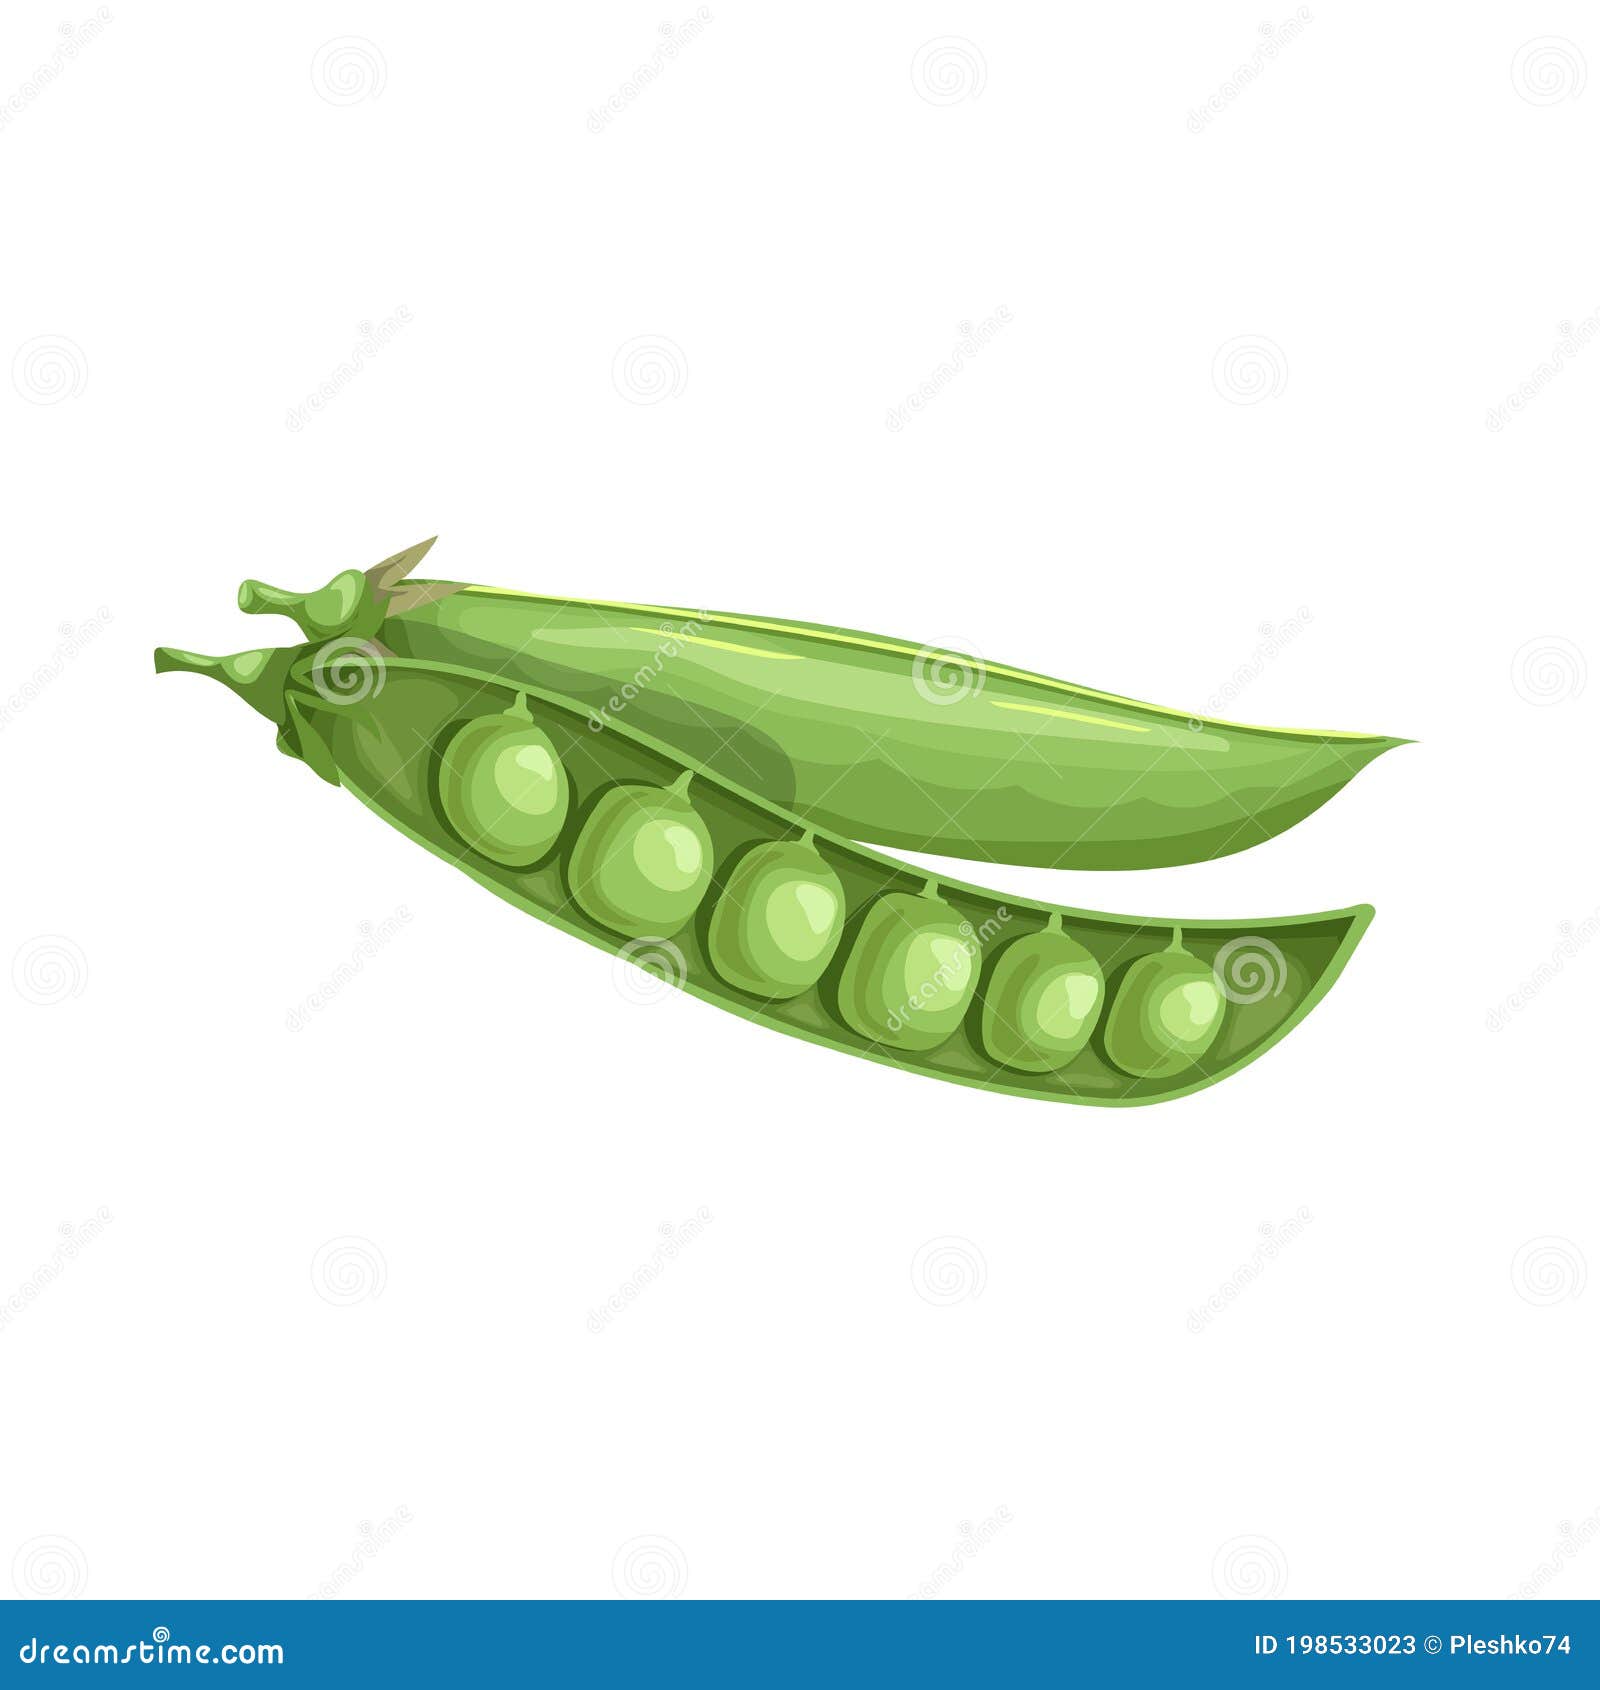 Cartoon Green Pea Open Pod with Seeds. Single Vegetable. Fresh Farm  Product. Eco Nutrition Stock Vector - Illustration of nutrition, nutrient:  198533023